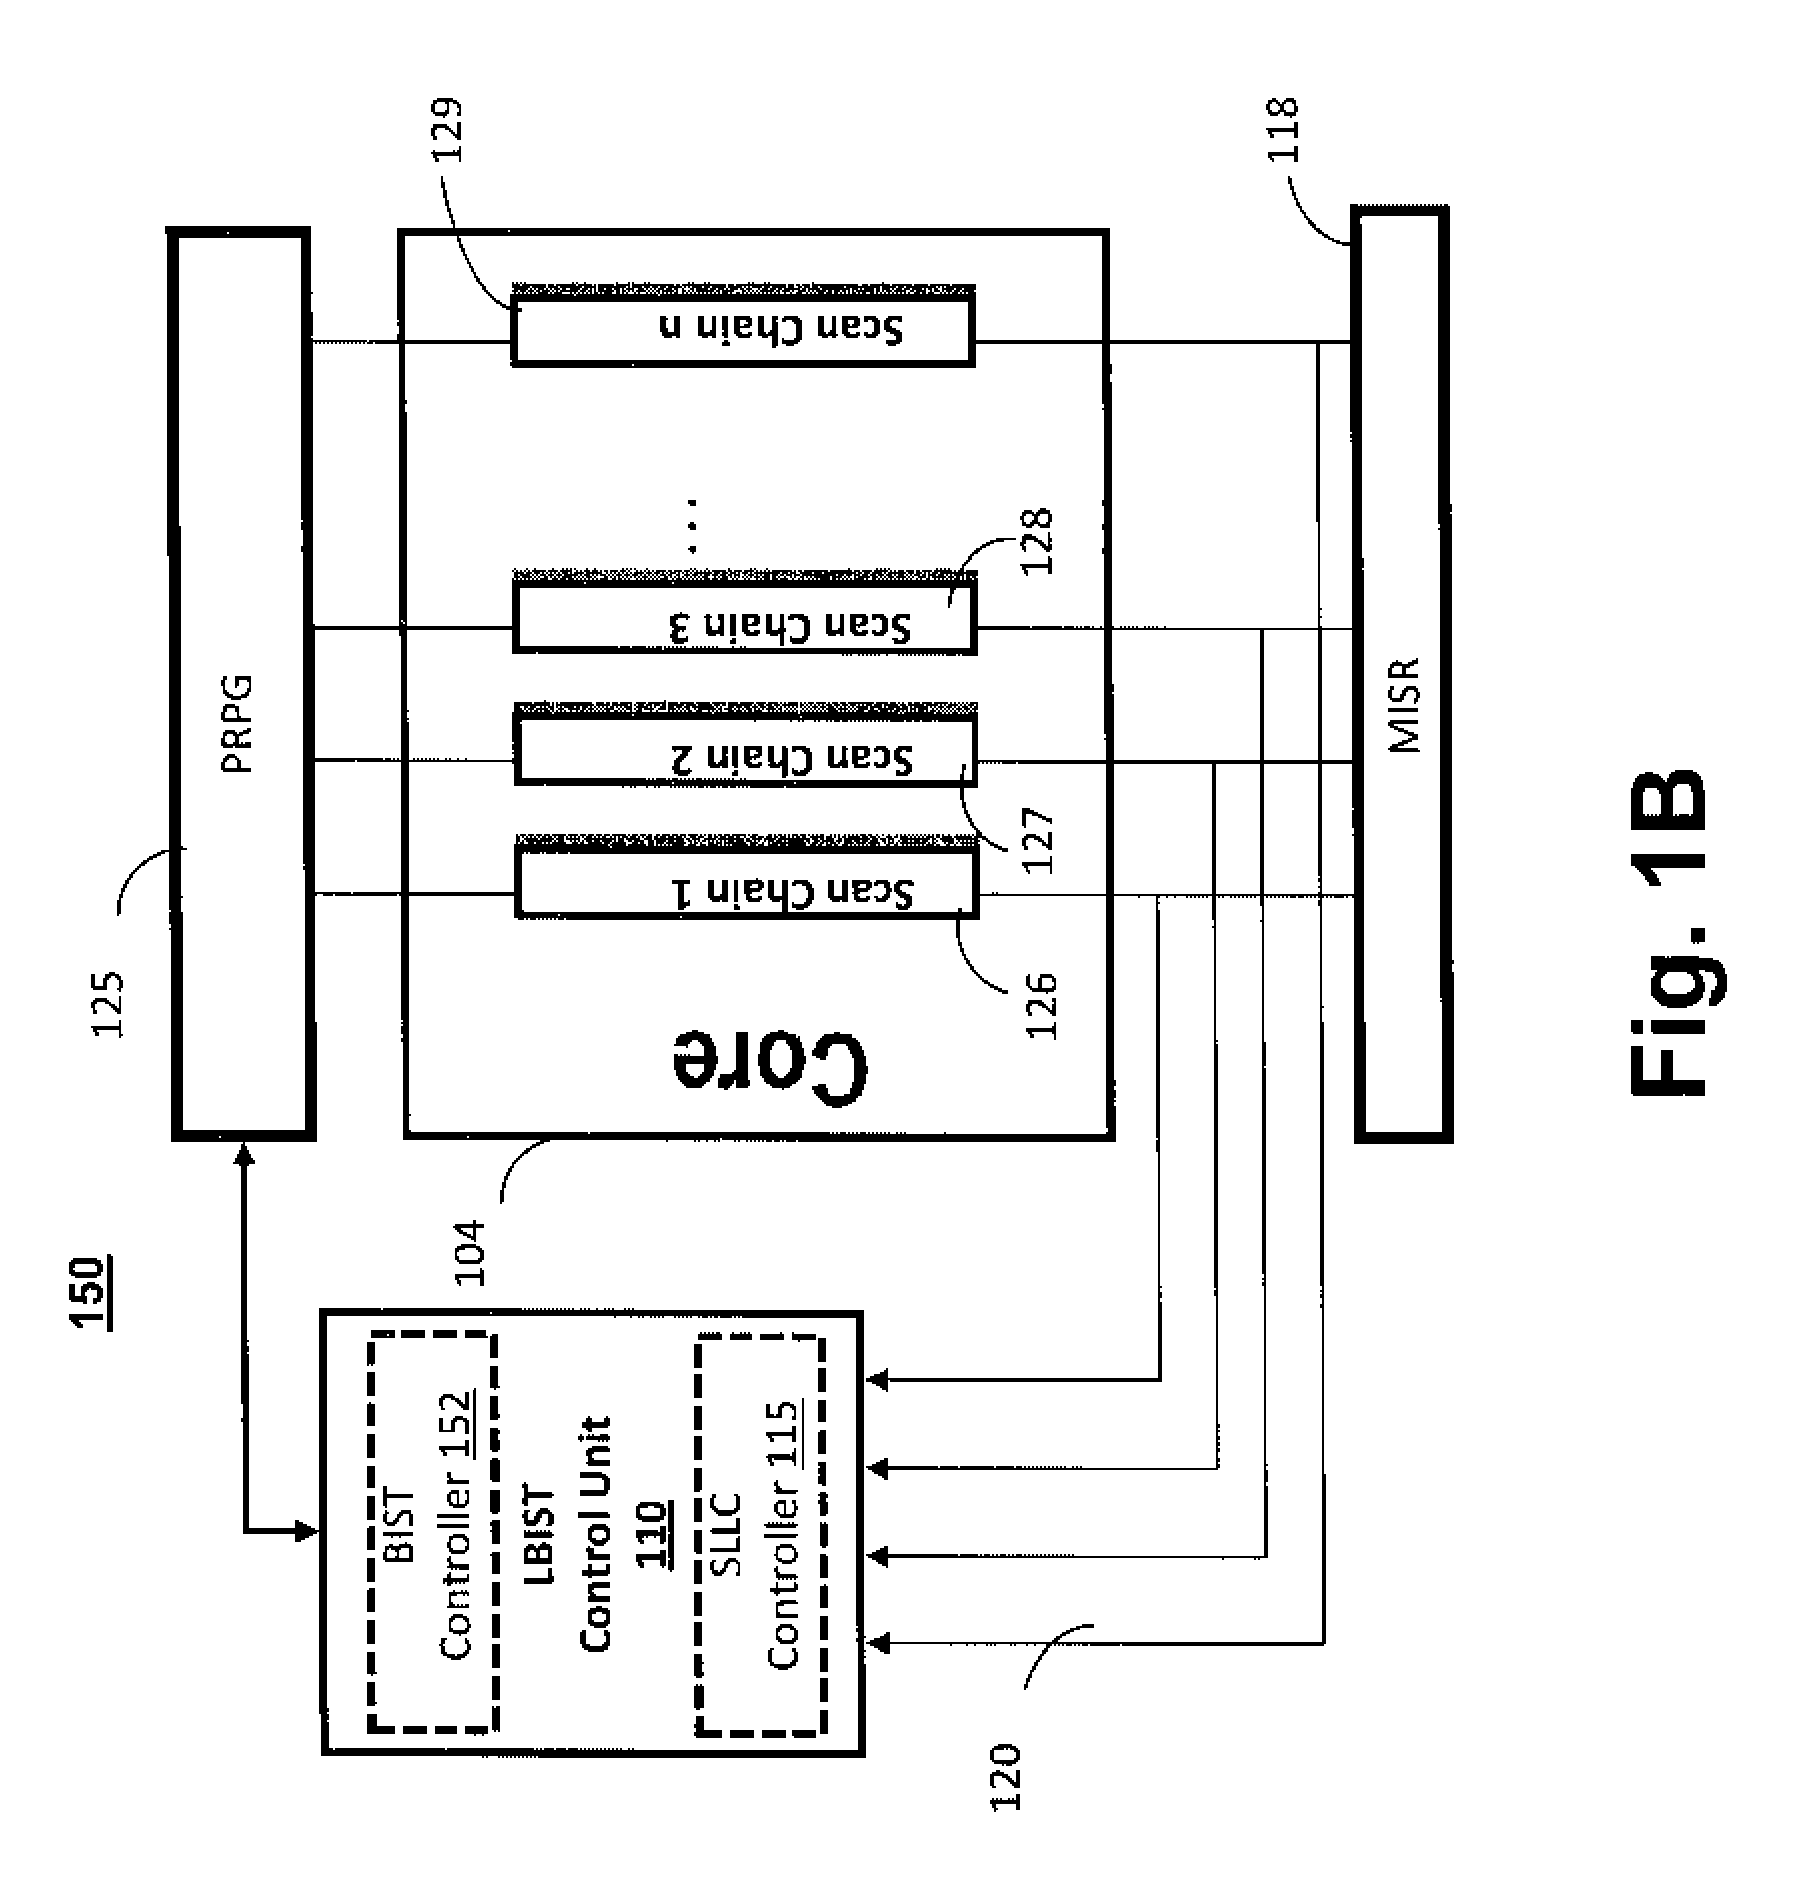 Method and Apparatus for Logic Built In Self Test (LBIST) Fault Detection in Multi-Core Processors